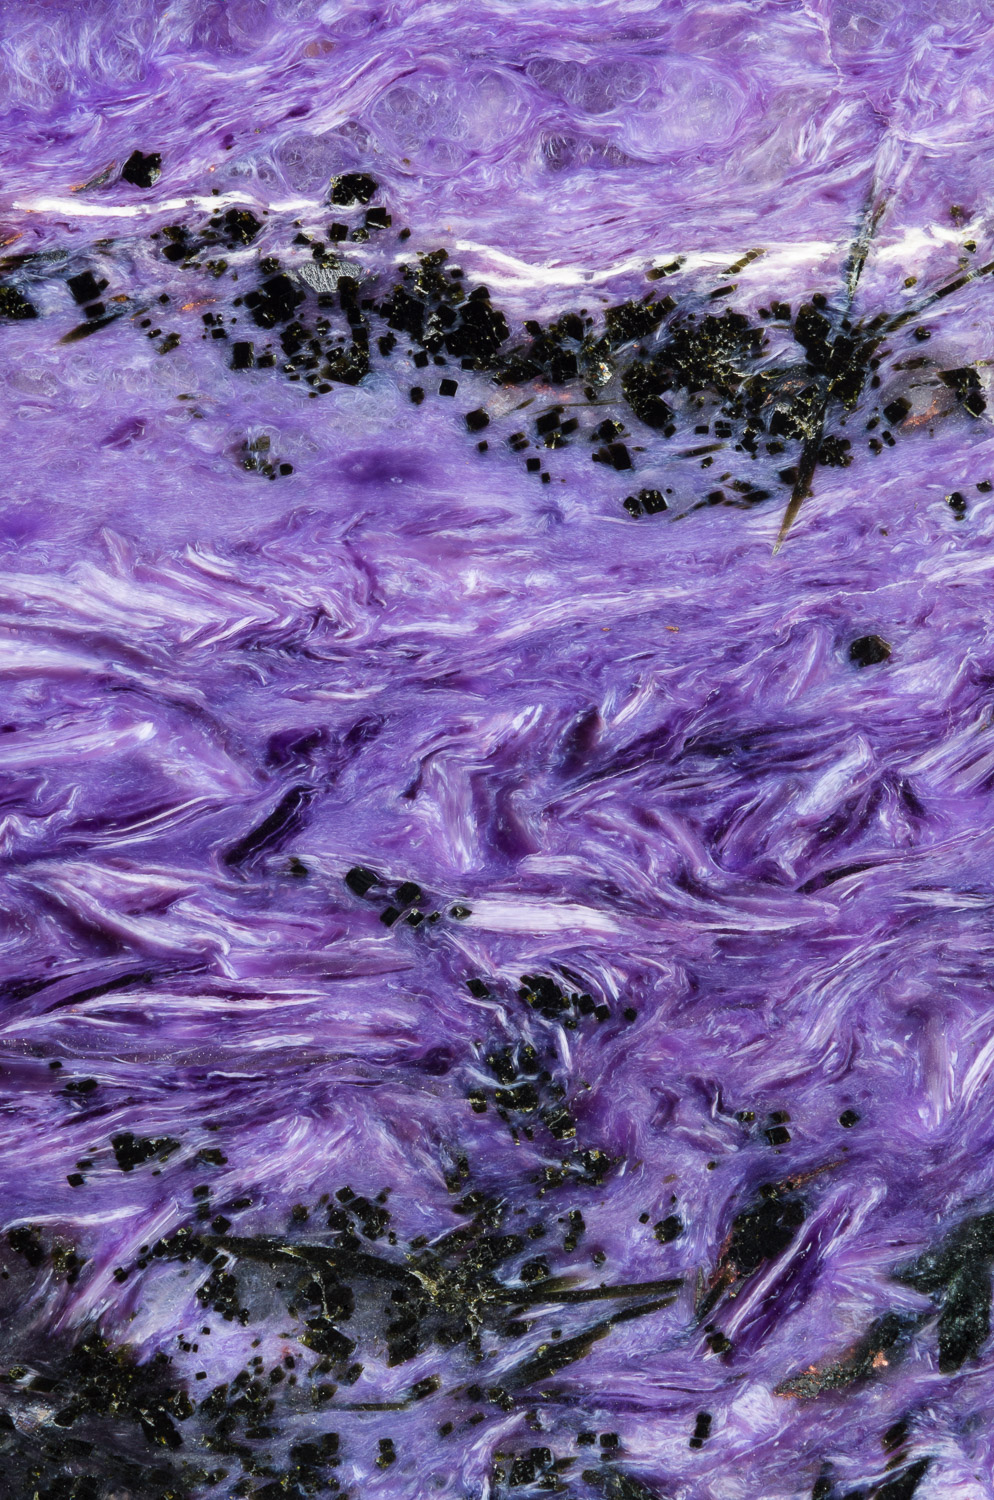 Macrophotograph of a slice of charoite; a rare silicate mineral found only in Siberia, Russia. Image #2829